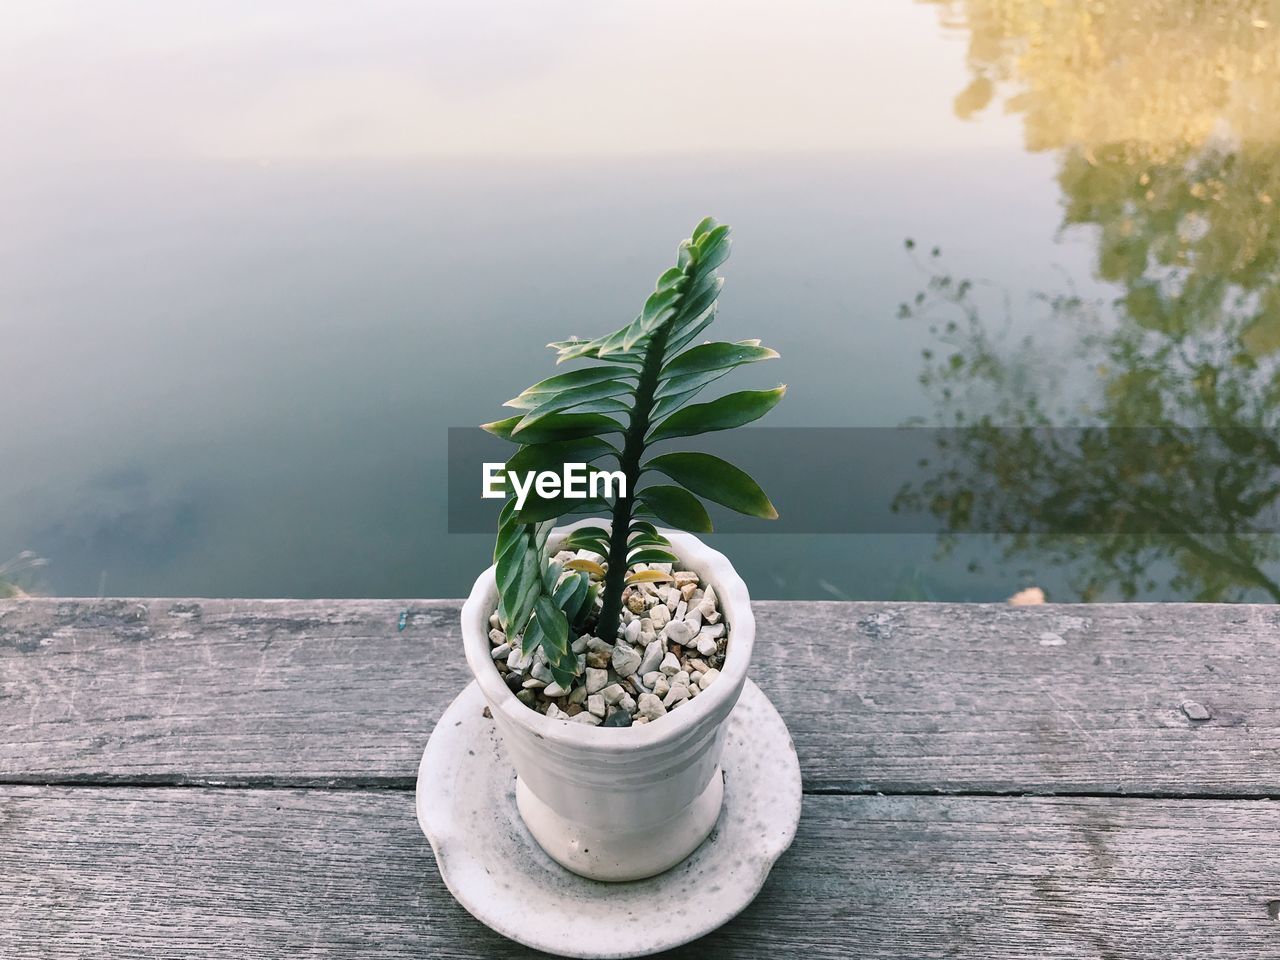 CLOSE-UP OF POTTED PLANT ON TABLE AGAINST SEA